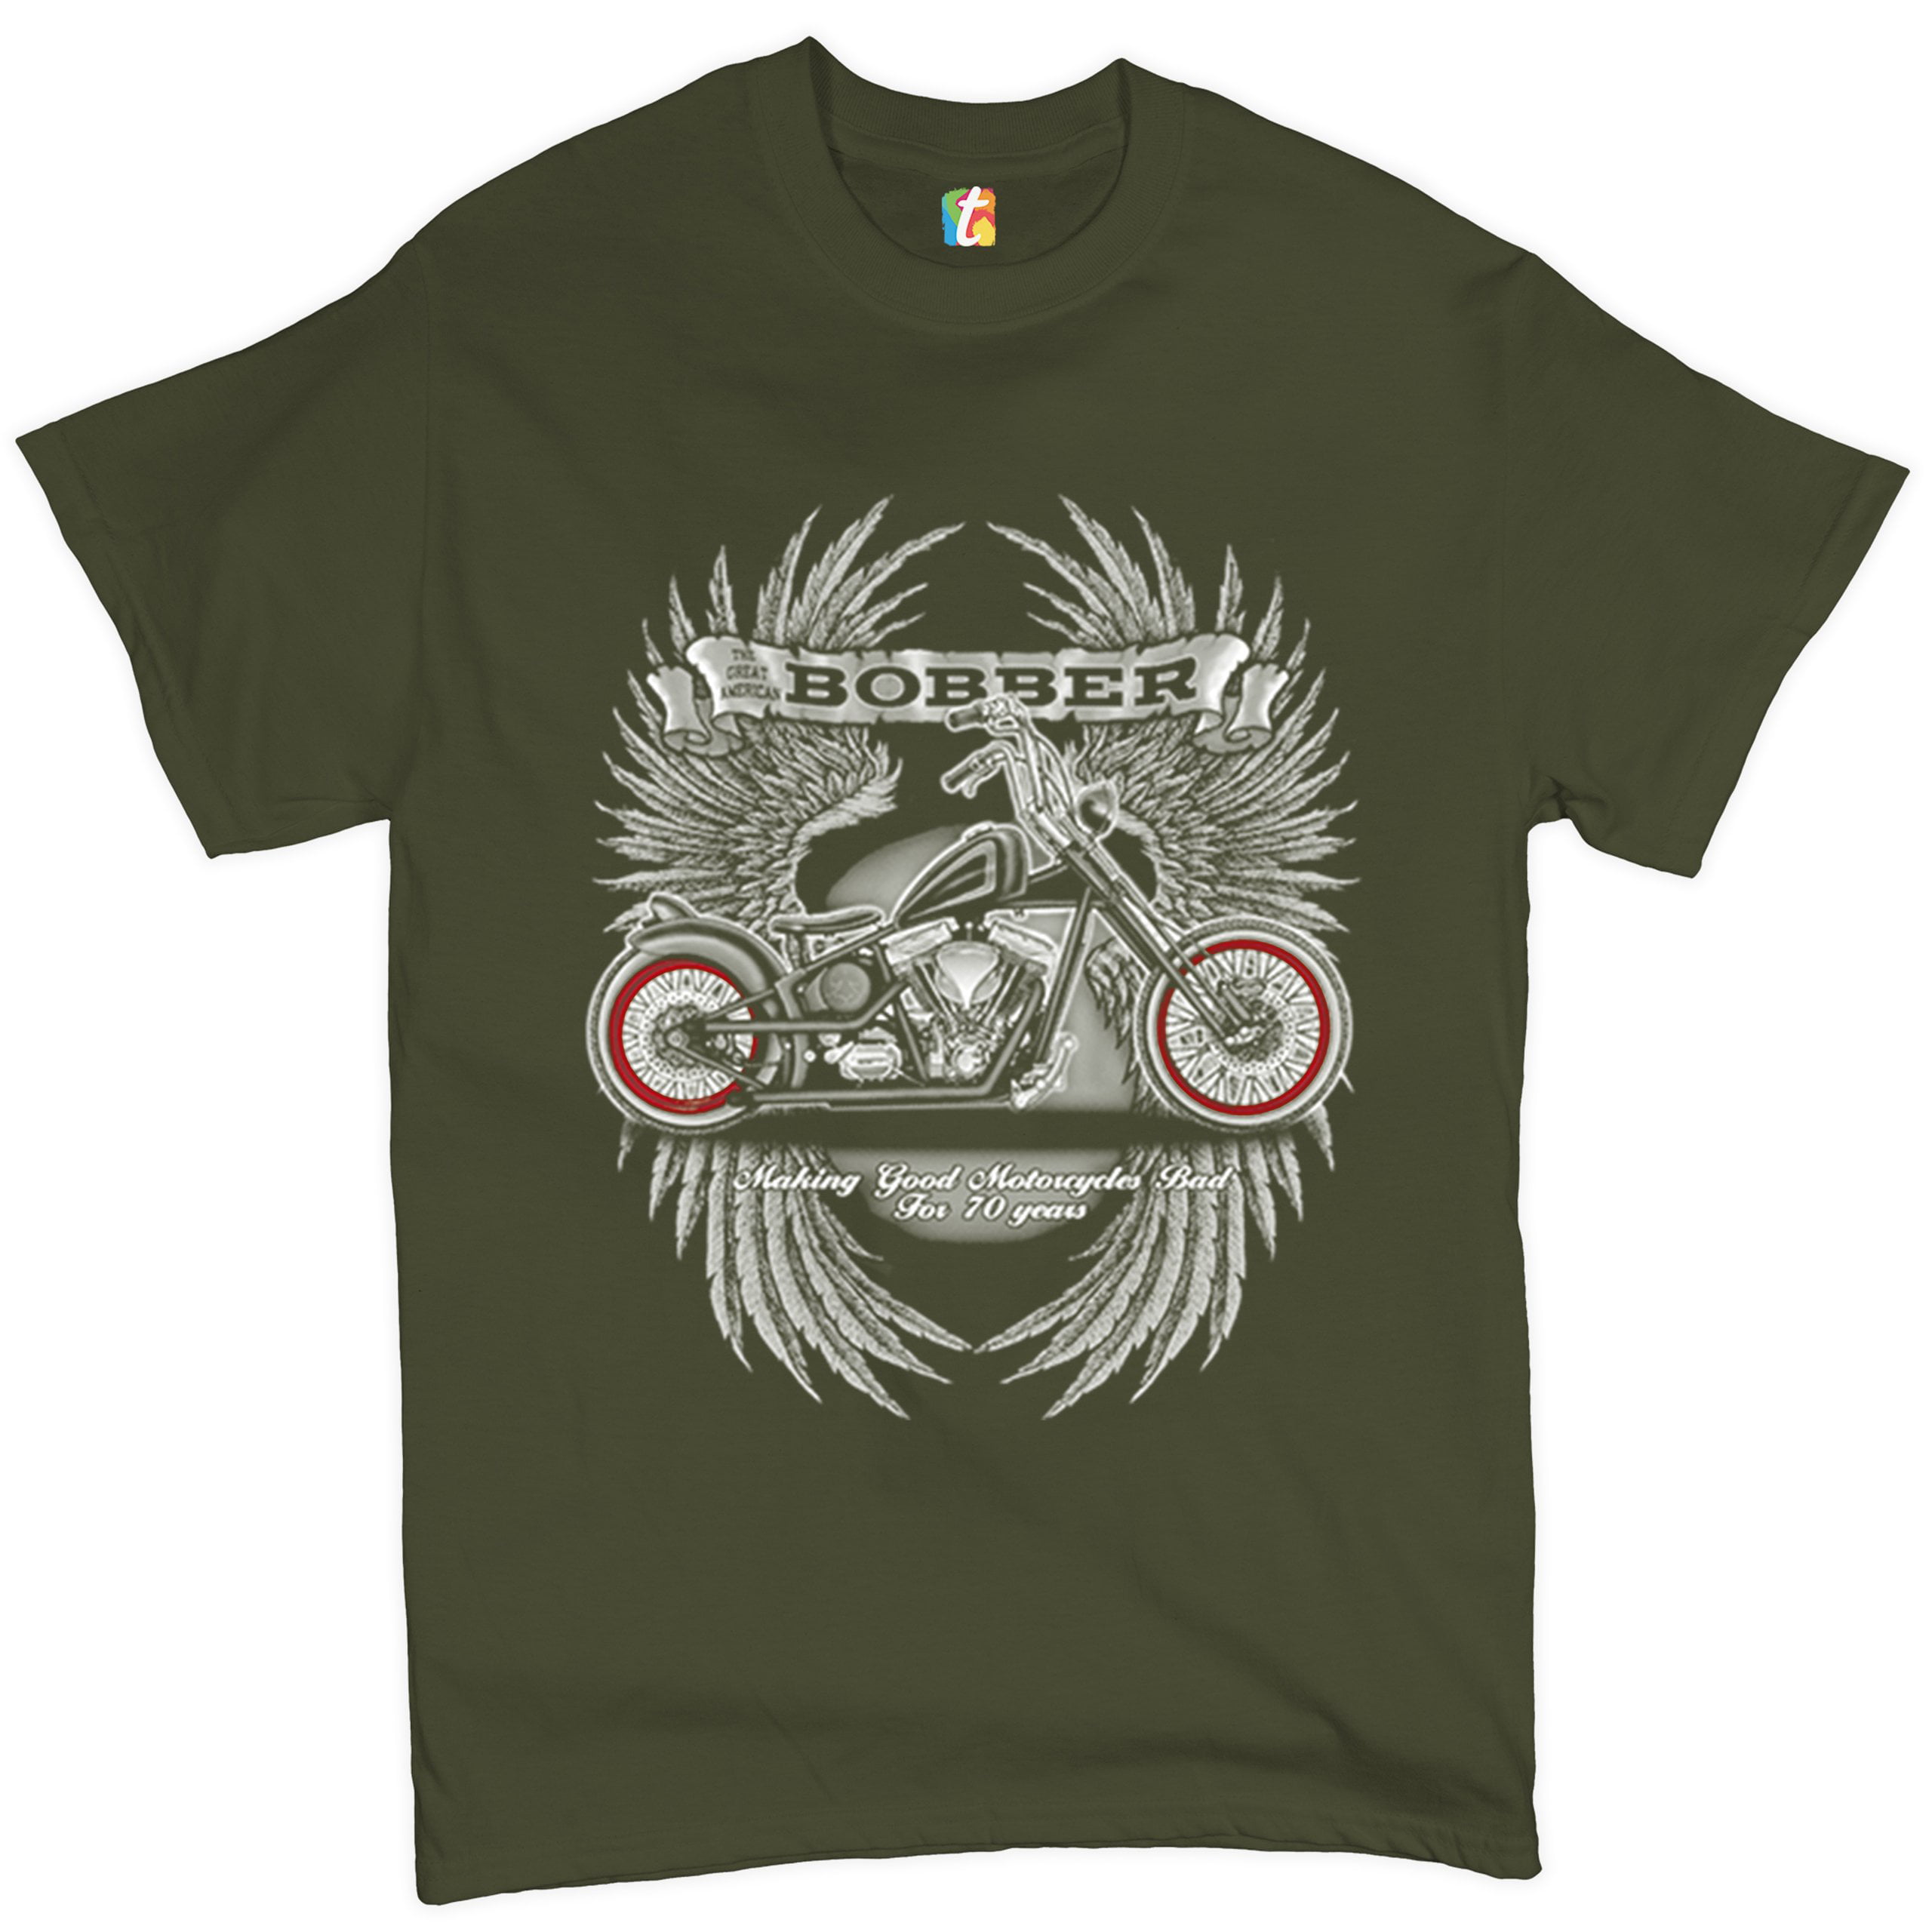 Tee Hunt The Great American Bobber T-Shirt Motorcycle Enthusiast